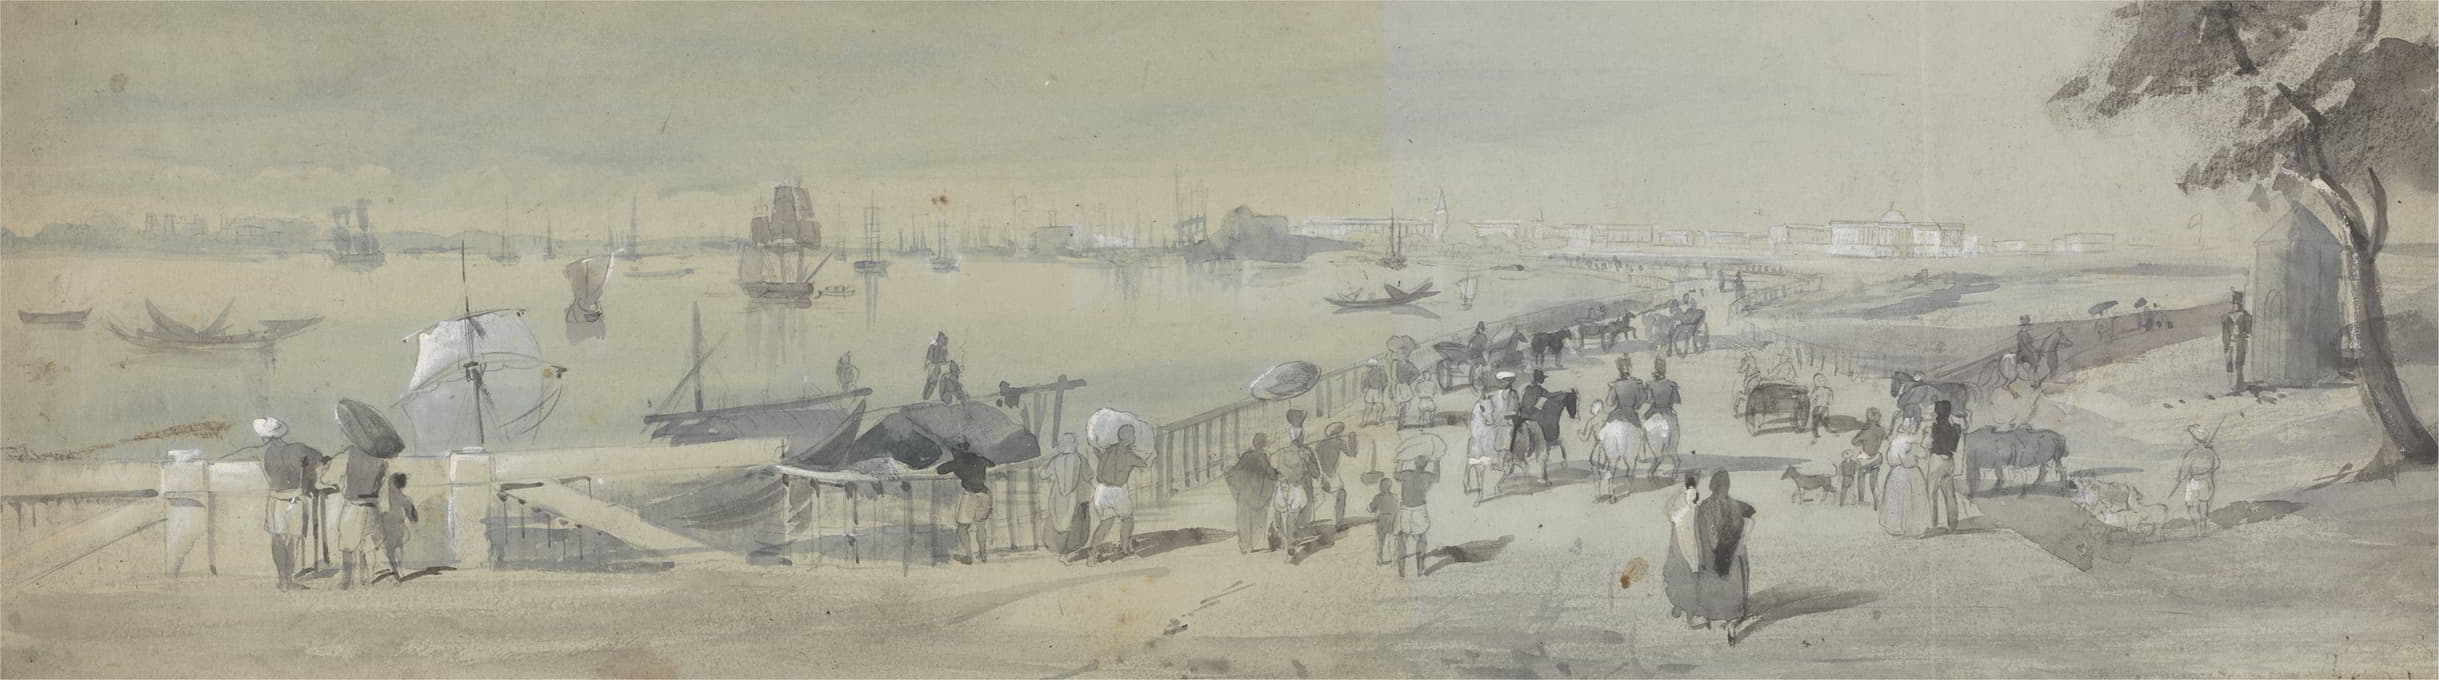 Sir Charles D'Oyly - General View of Calcutta, from the Entrance to the Water Gate of Fort William